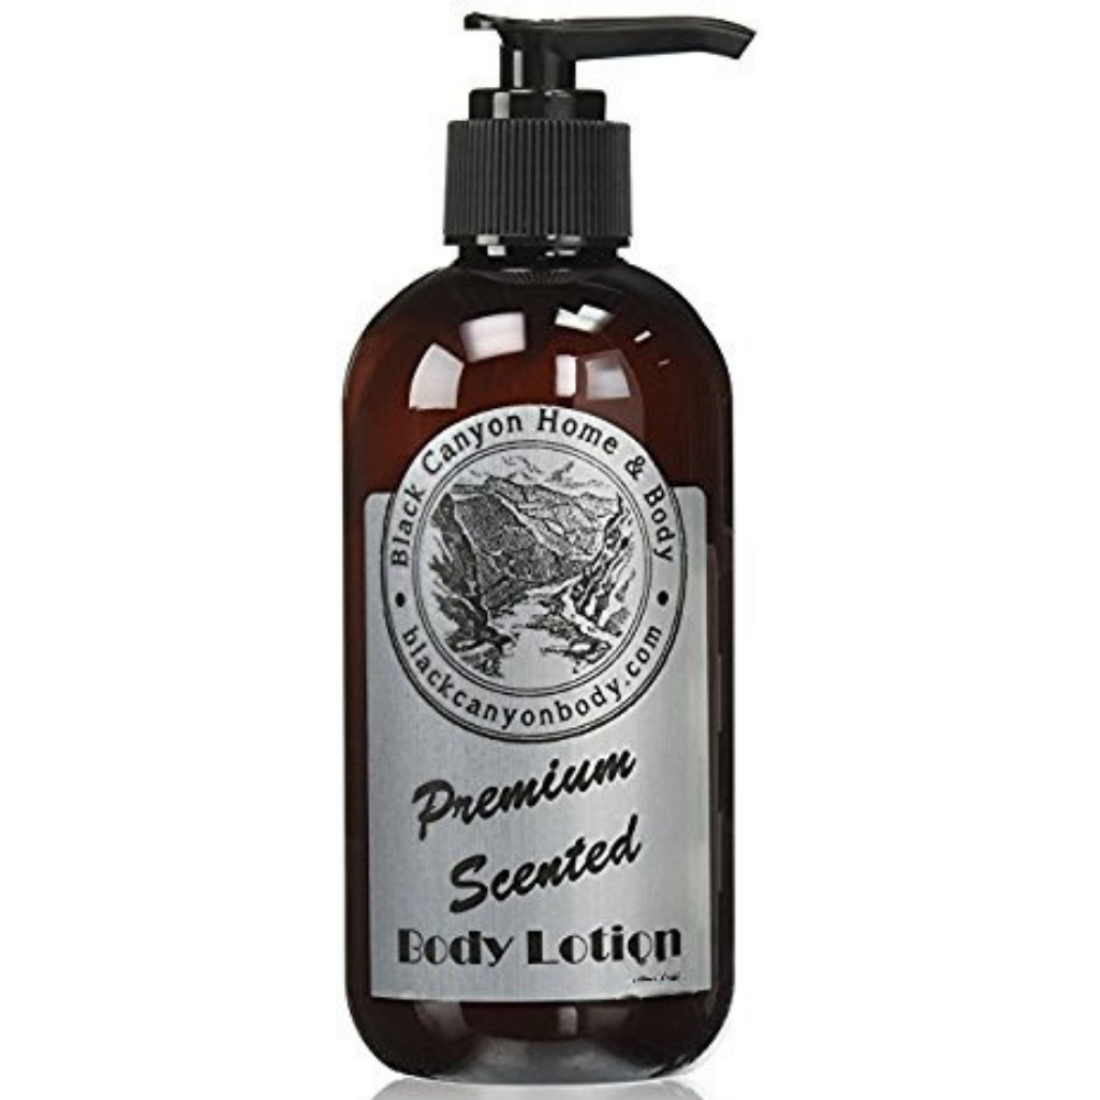 Paydens Cobalt Bay Rum & Tobacco Scented Luxury Body Lotion with Lanolin and Jojoba Oil For Men